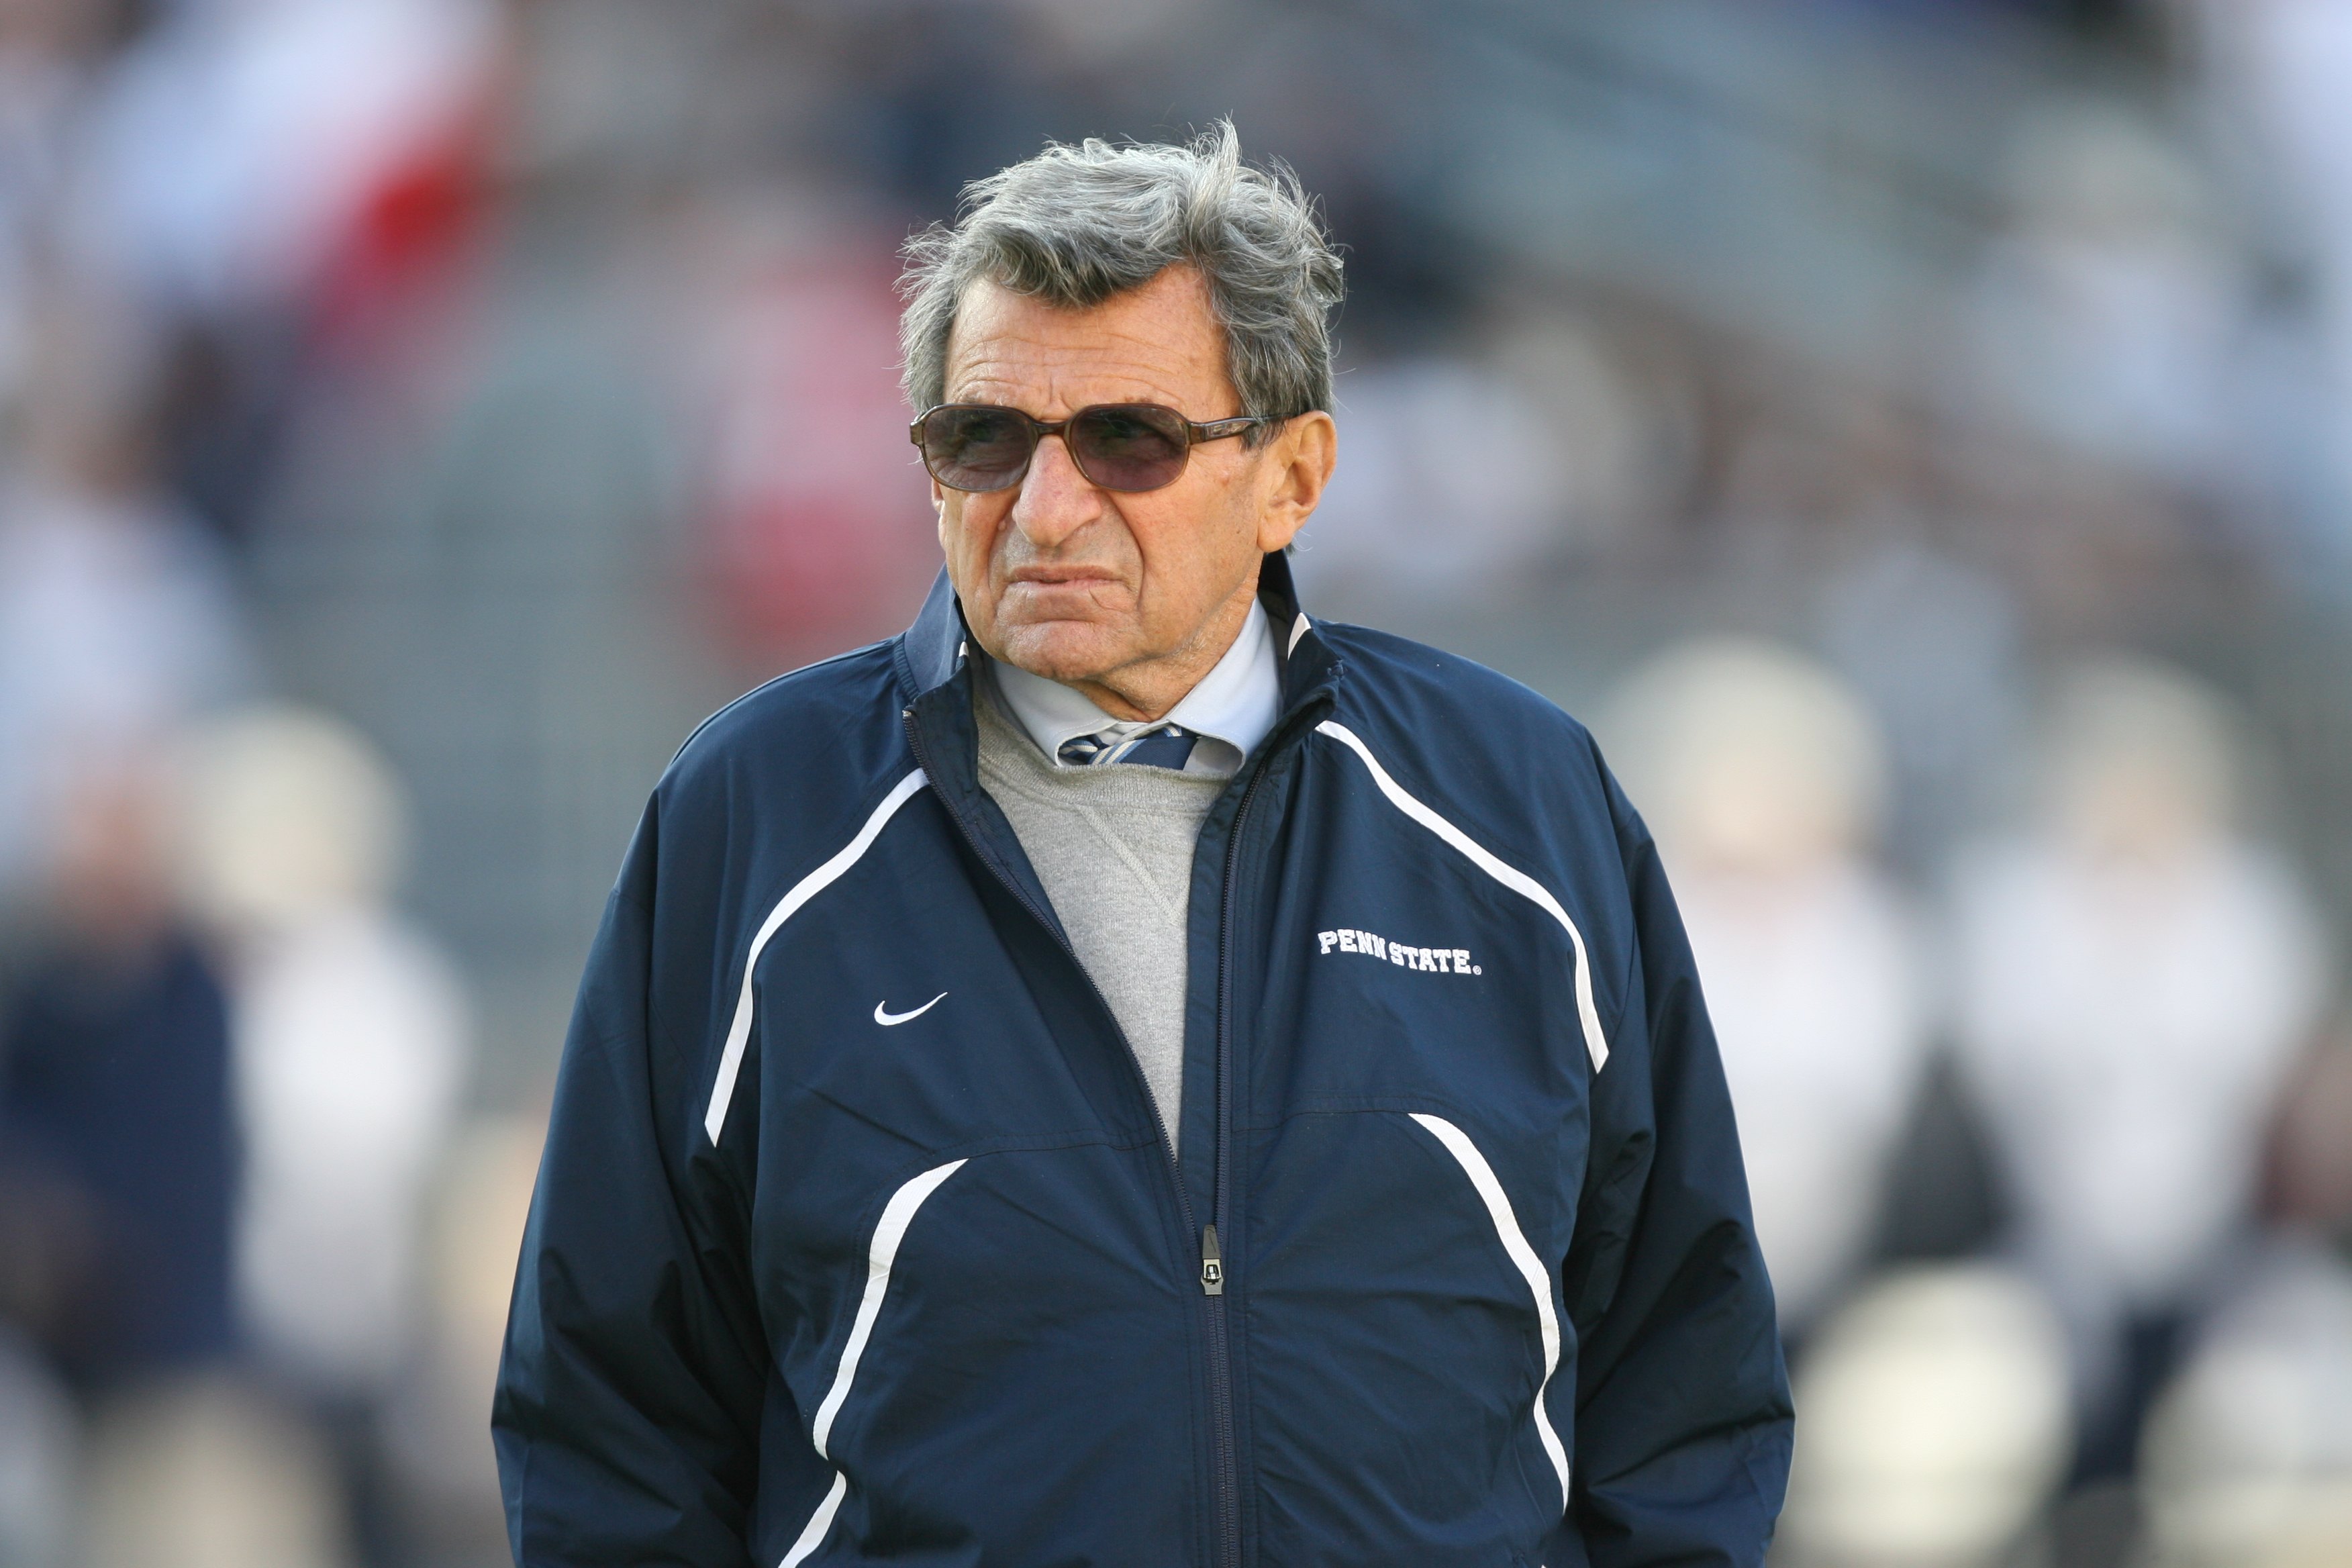 STATE COLLEGE, PA - NOVEMBER 7: Head coach Joe Paterno of the Penn State Nittany Lions watches warm-ups before a game against the Ohio State Buckeyes on November 7, 2009 at Beaver Stadium in State College, Pennsylvania. Ohio State won 24-7. (Photo by Hunt